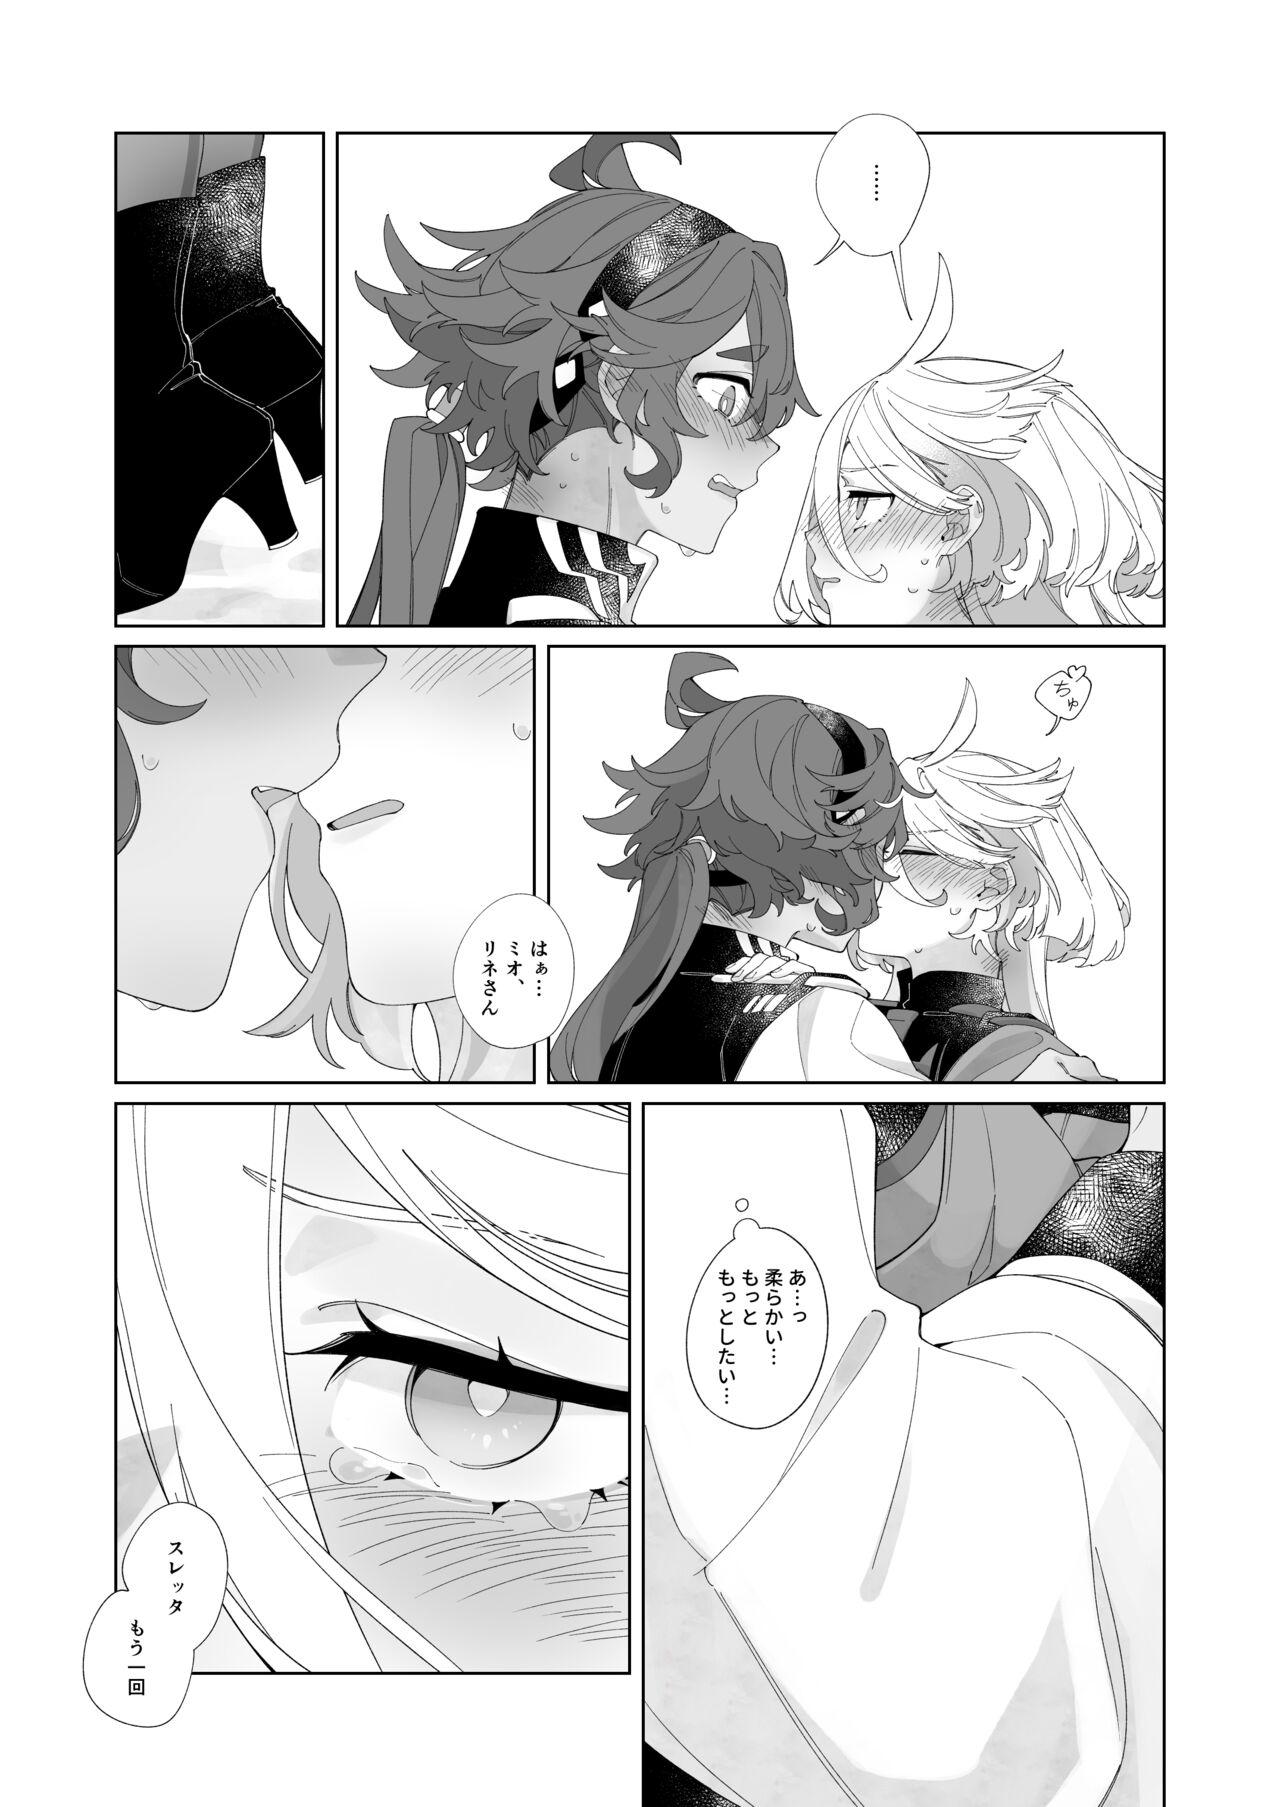 Gay College Kiss no Ato Nani ga Shitai? - After kissing, what else do you want to do? - Mobile suit gundam the witch from mercury Femdom Pov - Page 7